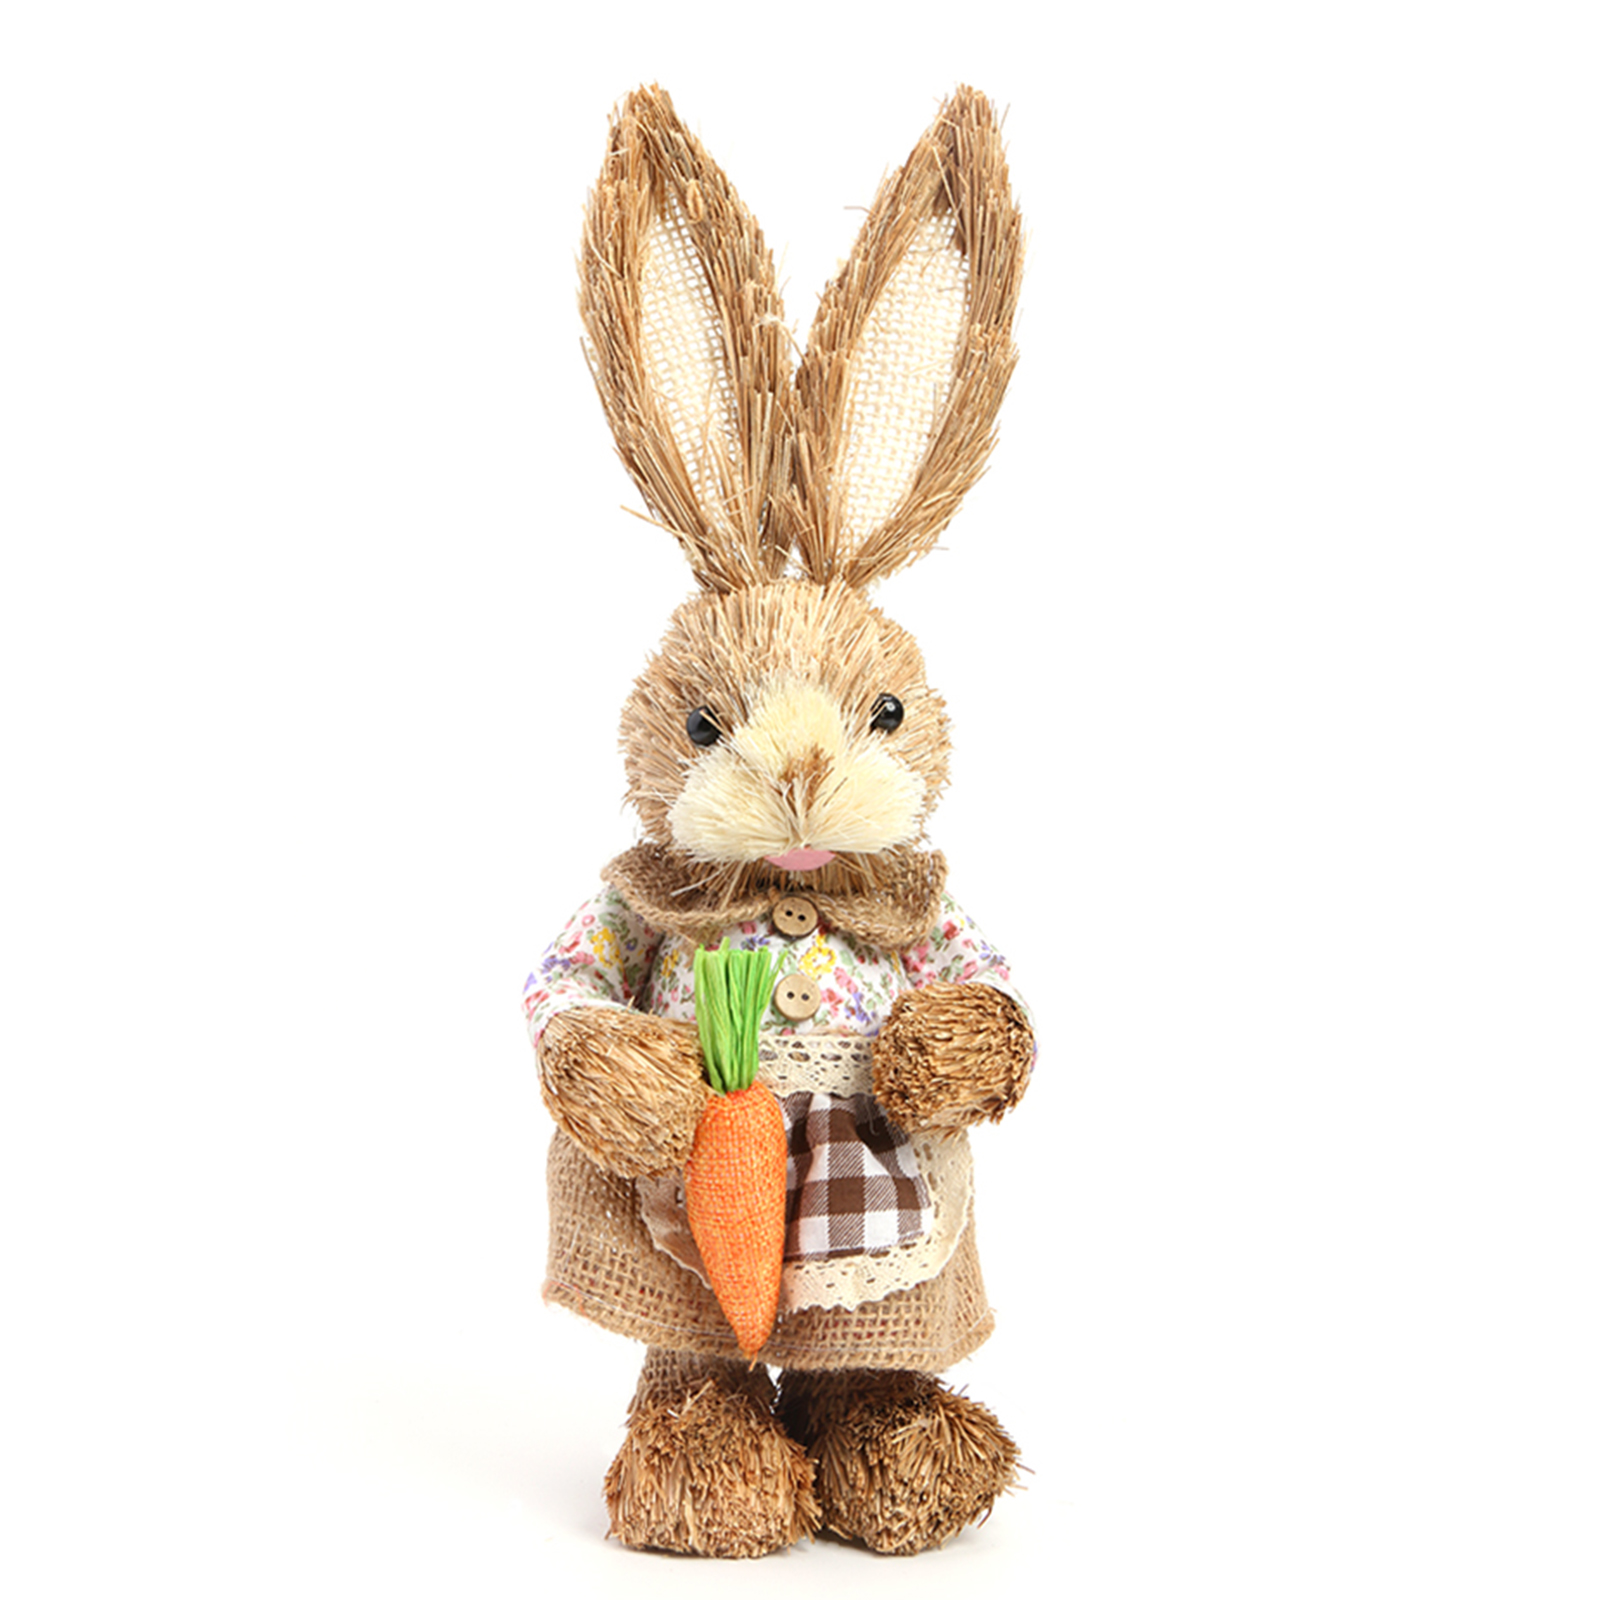 Straw Rabbit Ornament, 12 inch Standing Bunny with Carrot for Easter (8)